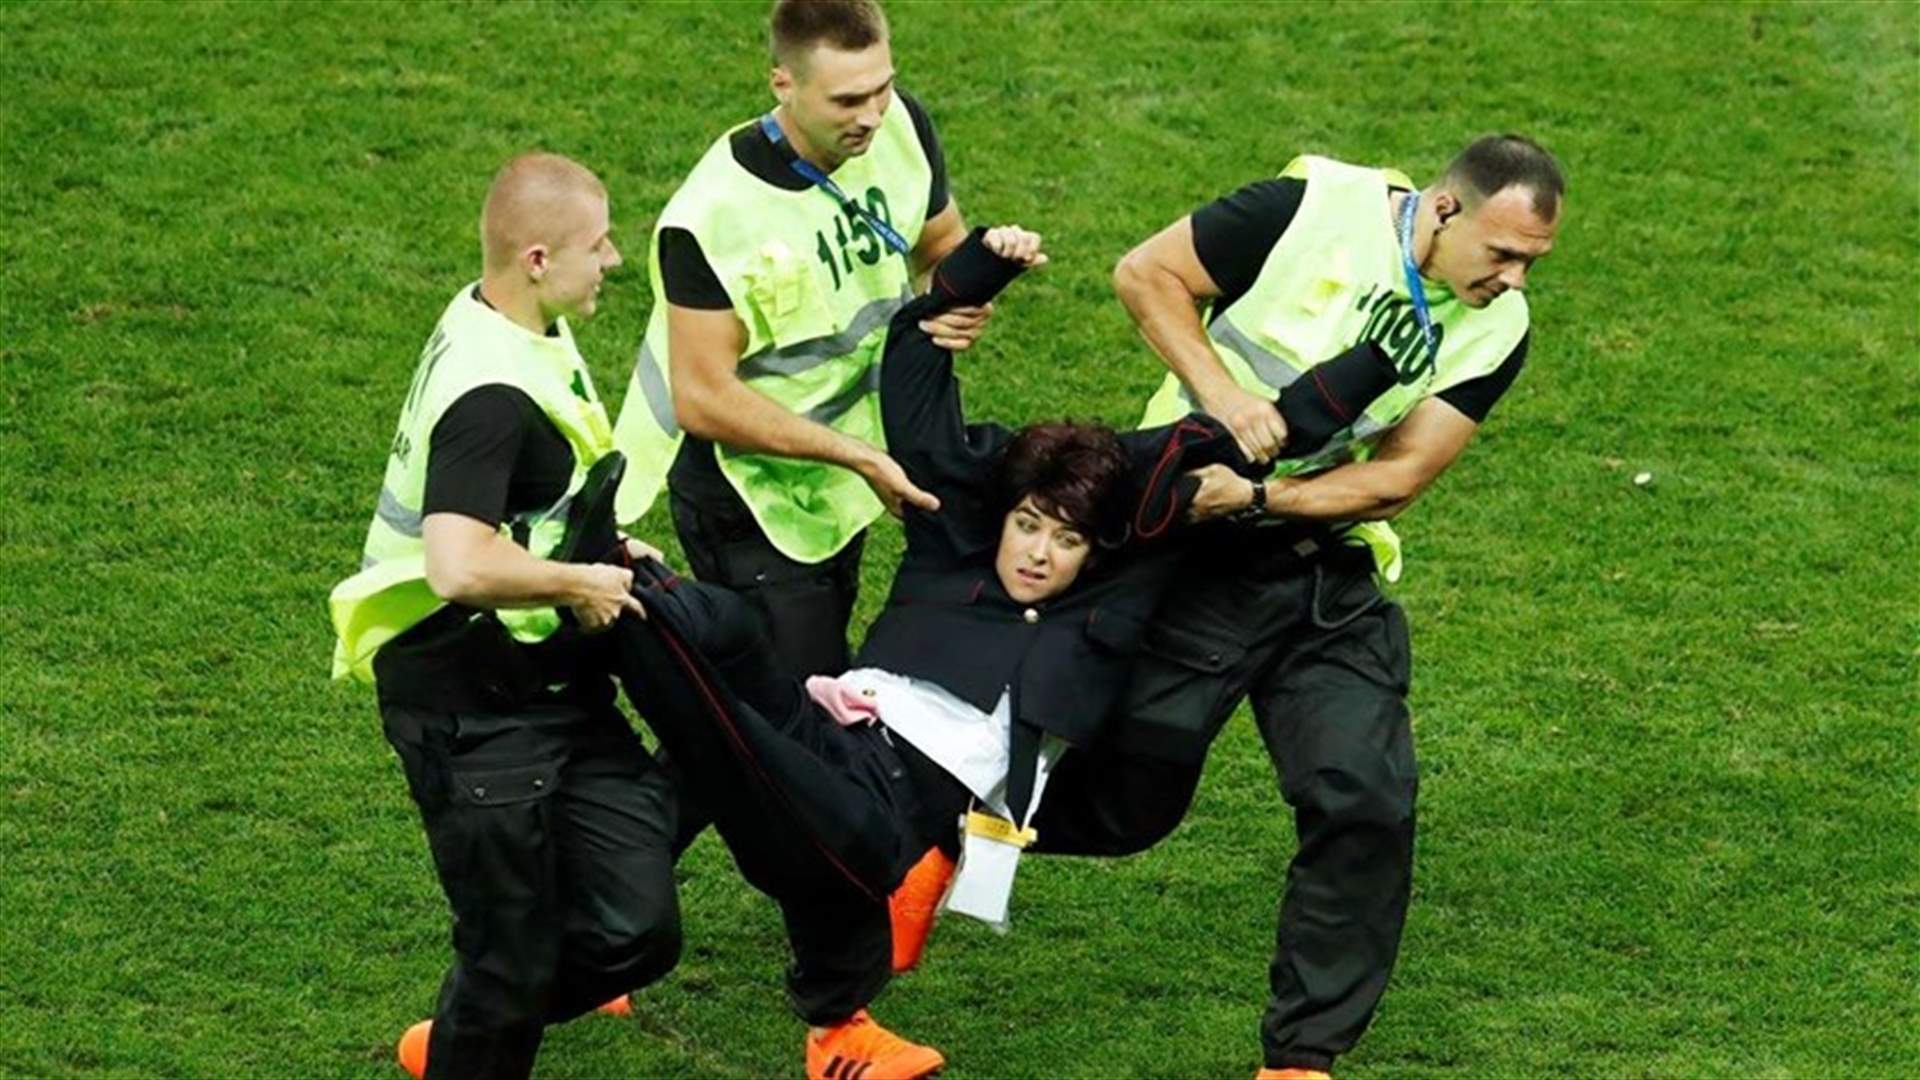 &#39;Pussy Riot&#39; members wore police uniforms in World Cup pitch invasion